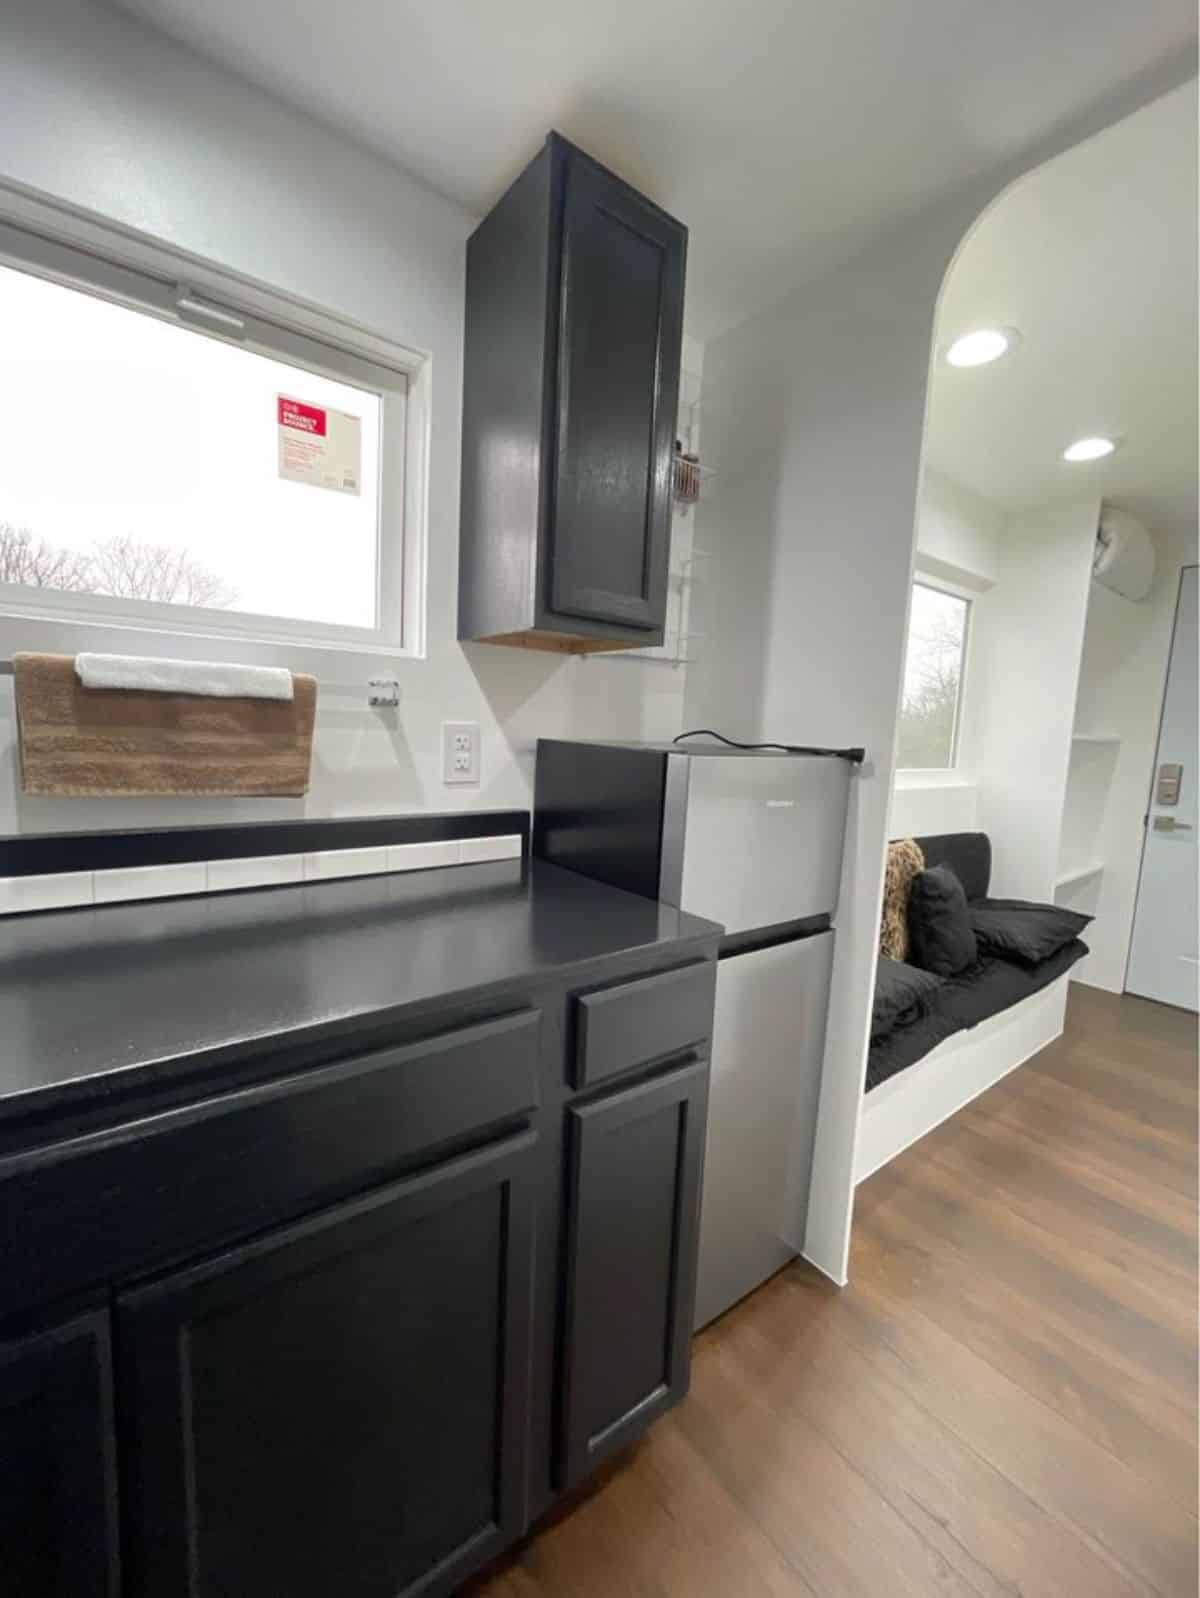 Kitchen area of mobile tiny house